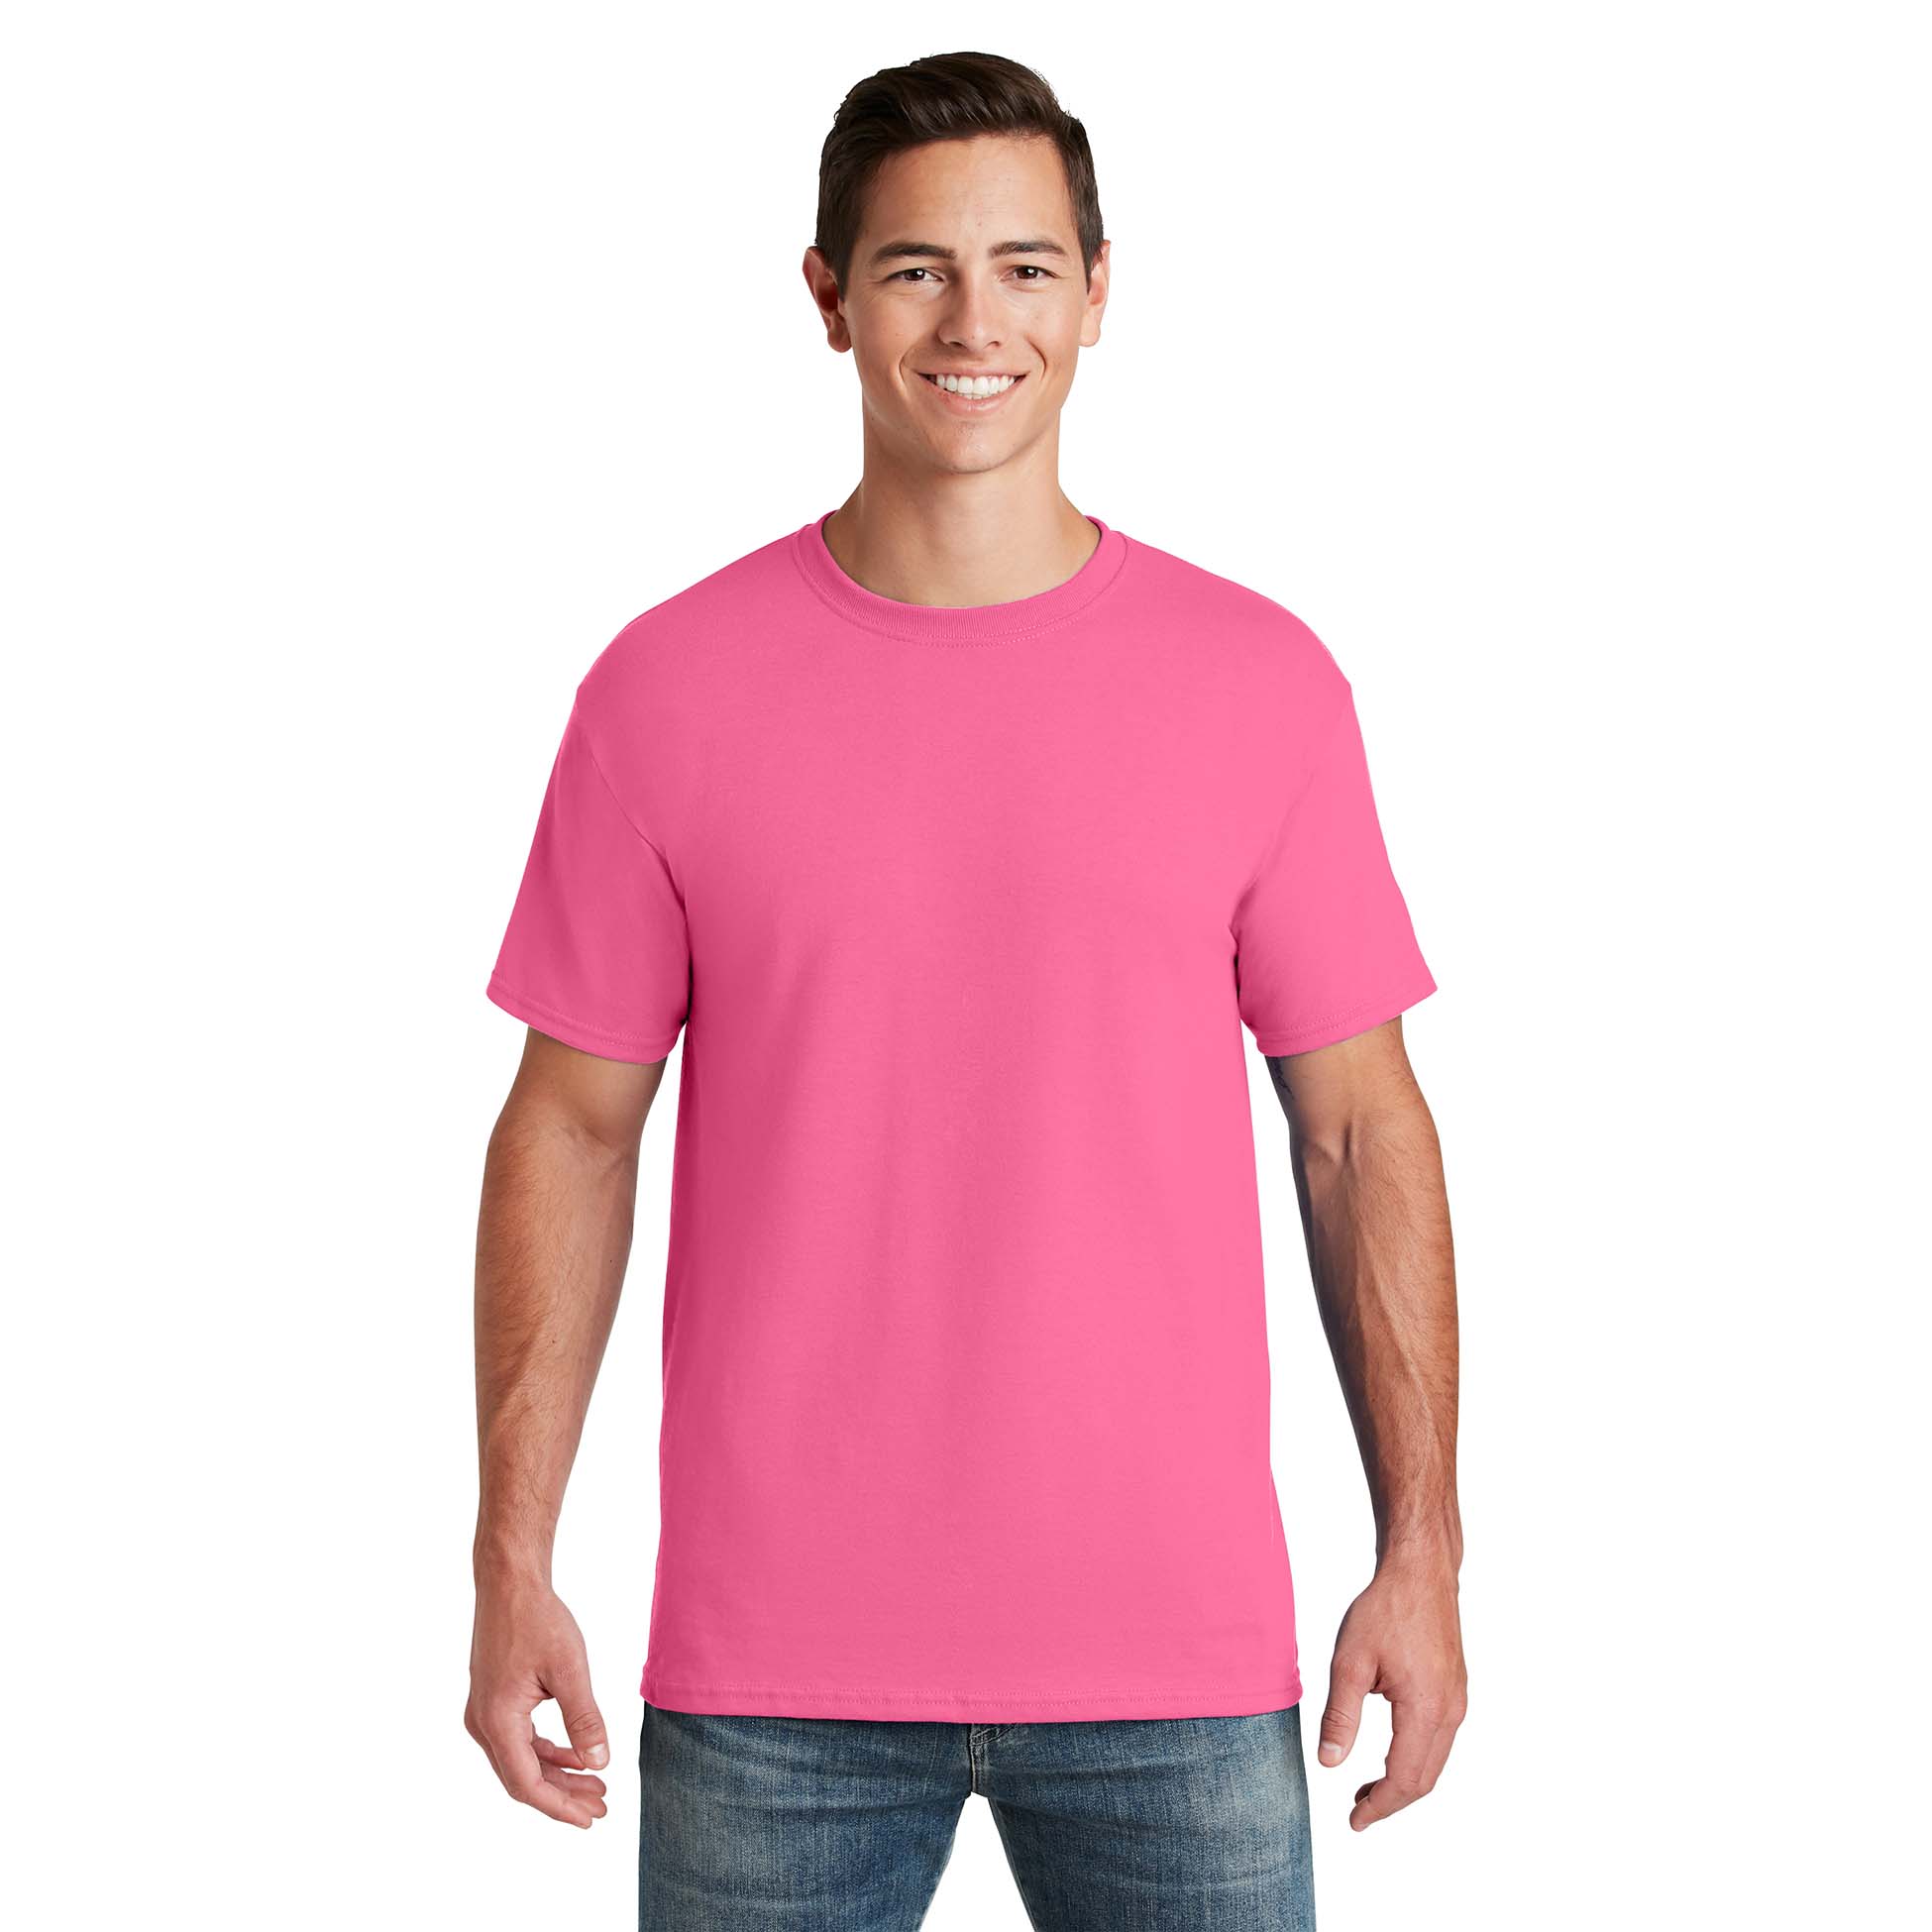 neon pink color t shirt,Save up to 16%,www.ilcascinone.com